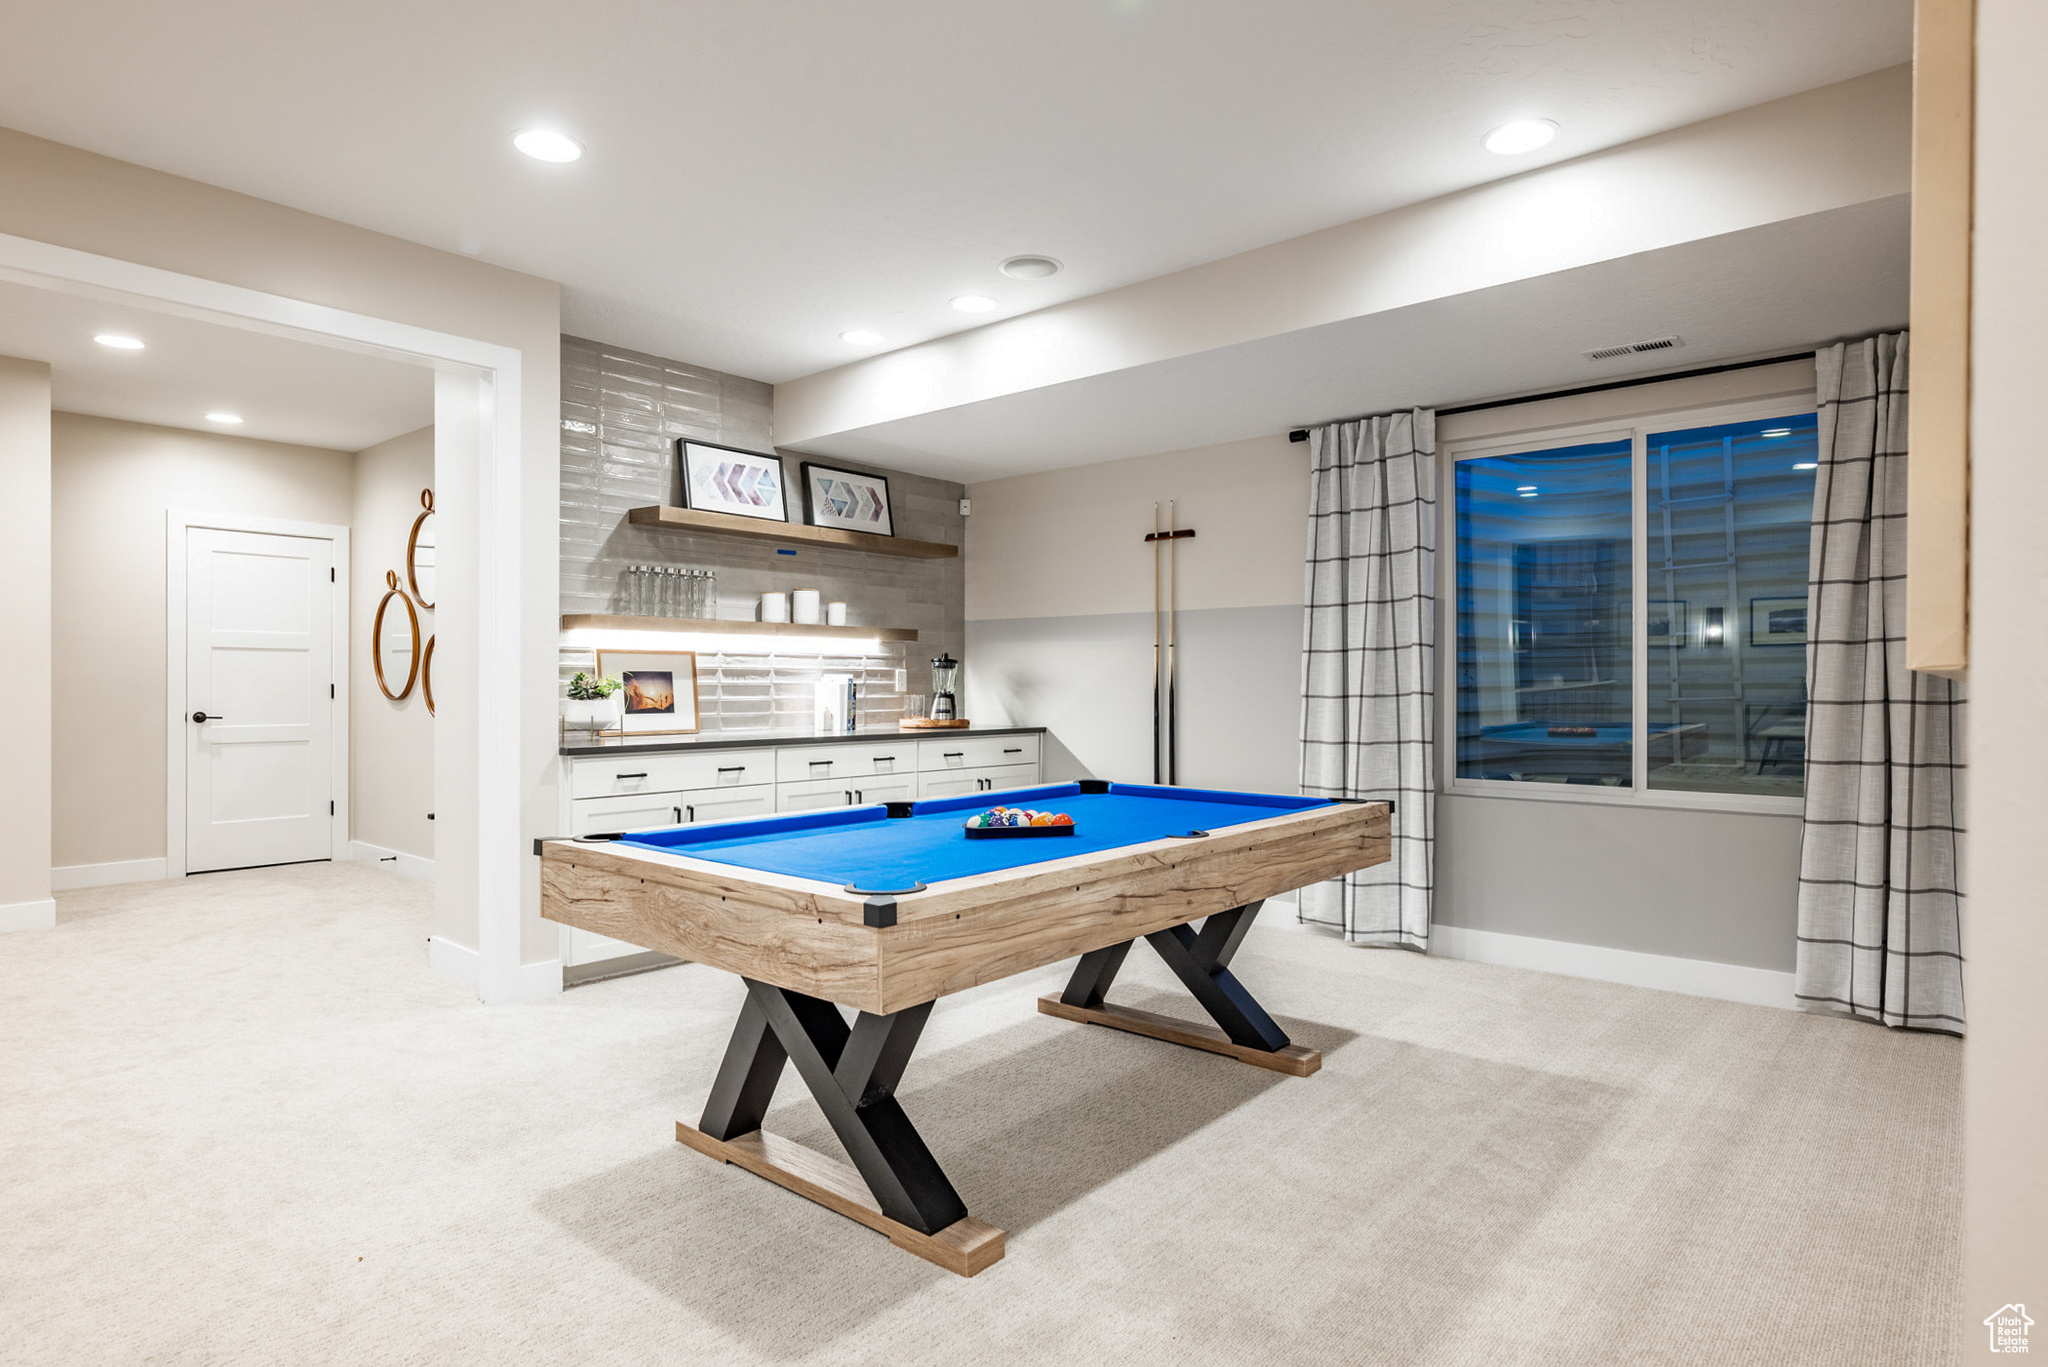 Playroom featuring pool table and light carpet